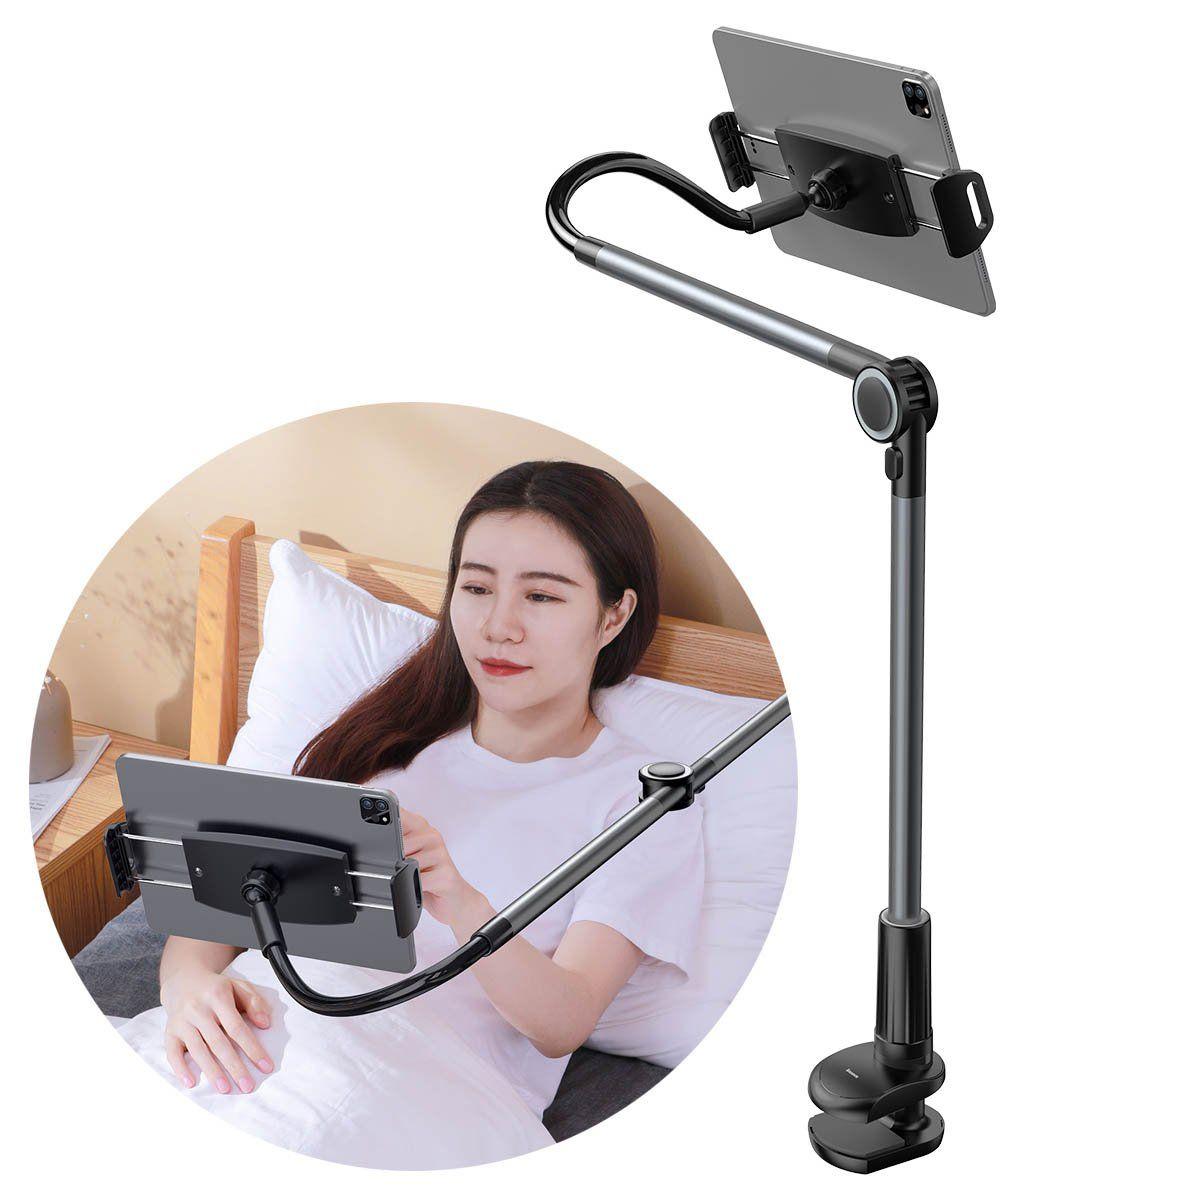 Baseus Otaku life rotary adjustment lazy holder Applicable for phone and tablet gray (SULR-B0G)